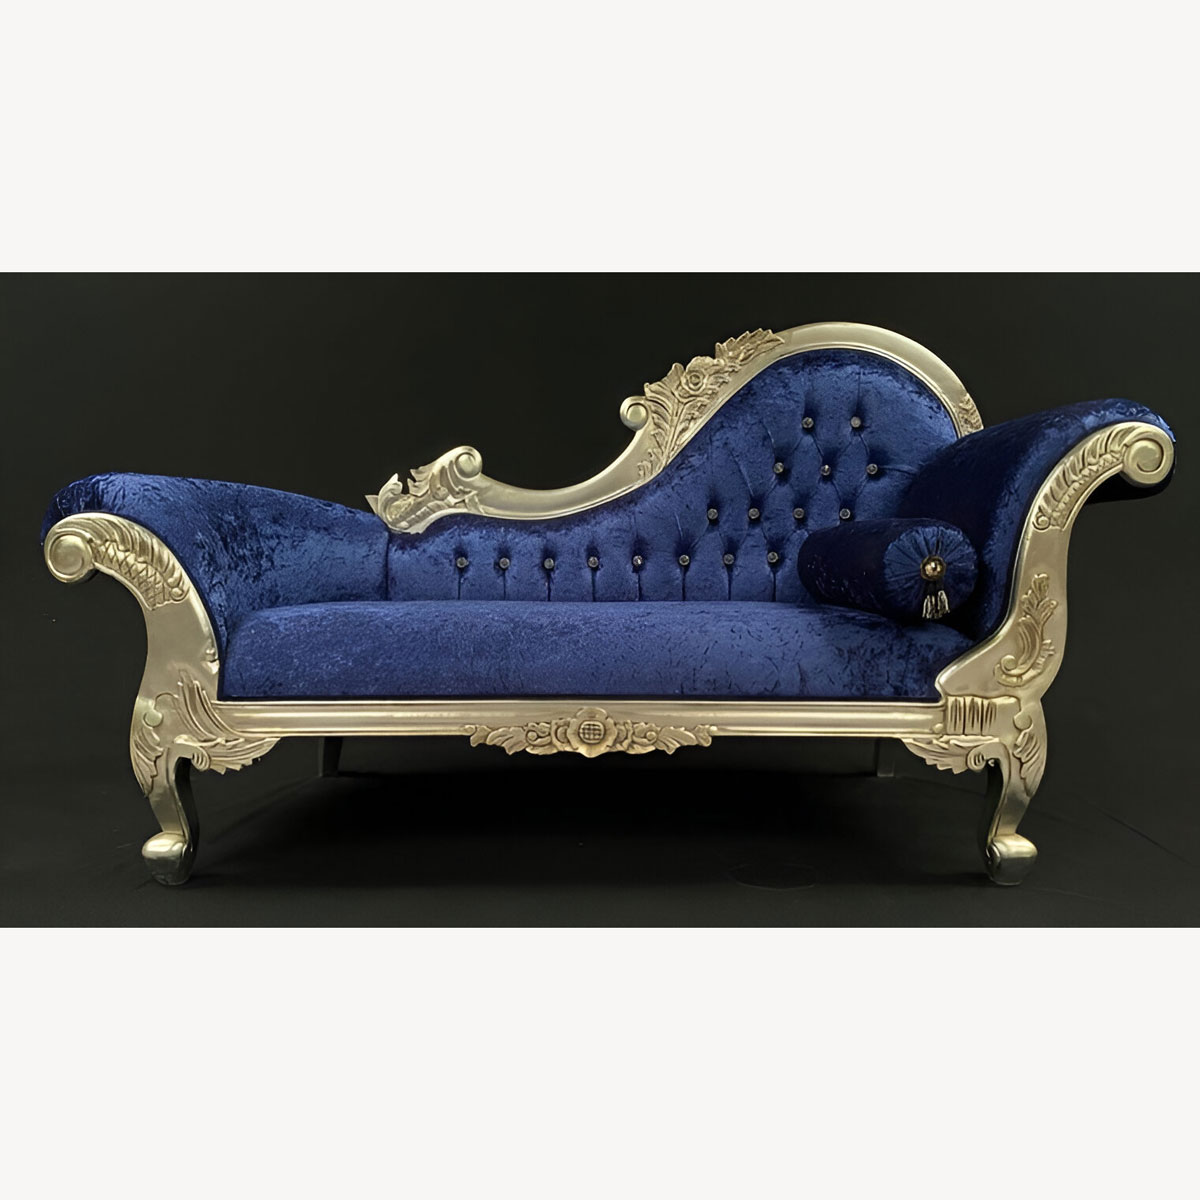 Chaise Hampshire Sofa In Silver Leaf Frame Upholstered In Blue Crushed Velvet With Crystal Buttoning 1 - Hampshire Barn Interiors - Chaise Hampshire Sofa In Silver Leaf Frame Upholstered In Blue Crushed Velvet With Crystal Buttoning -